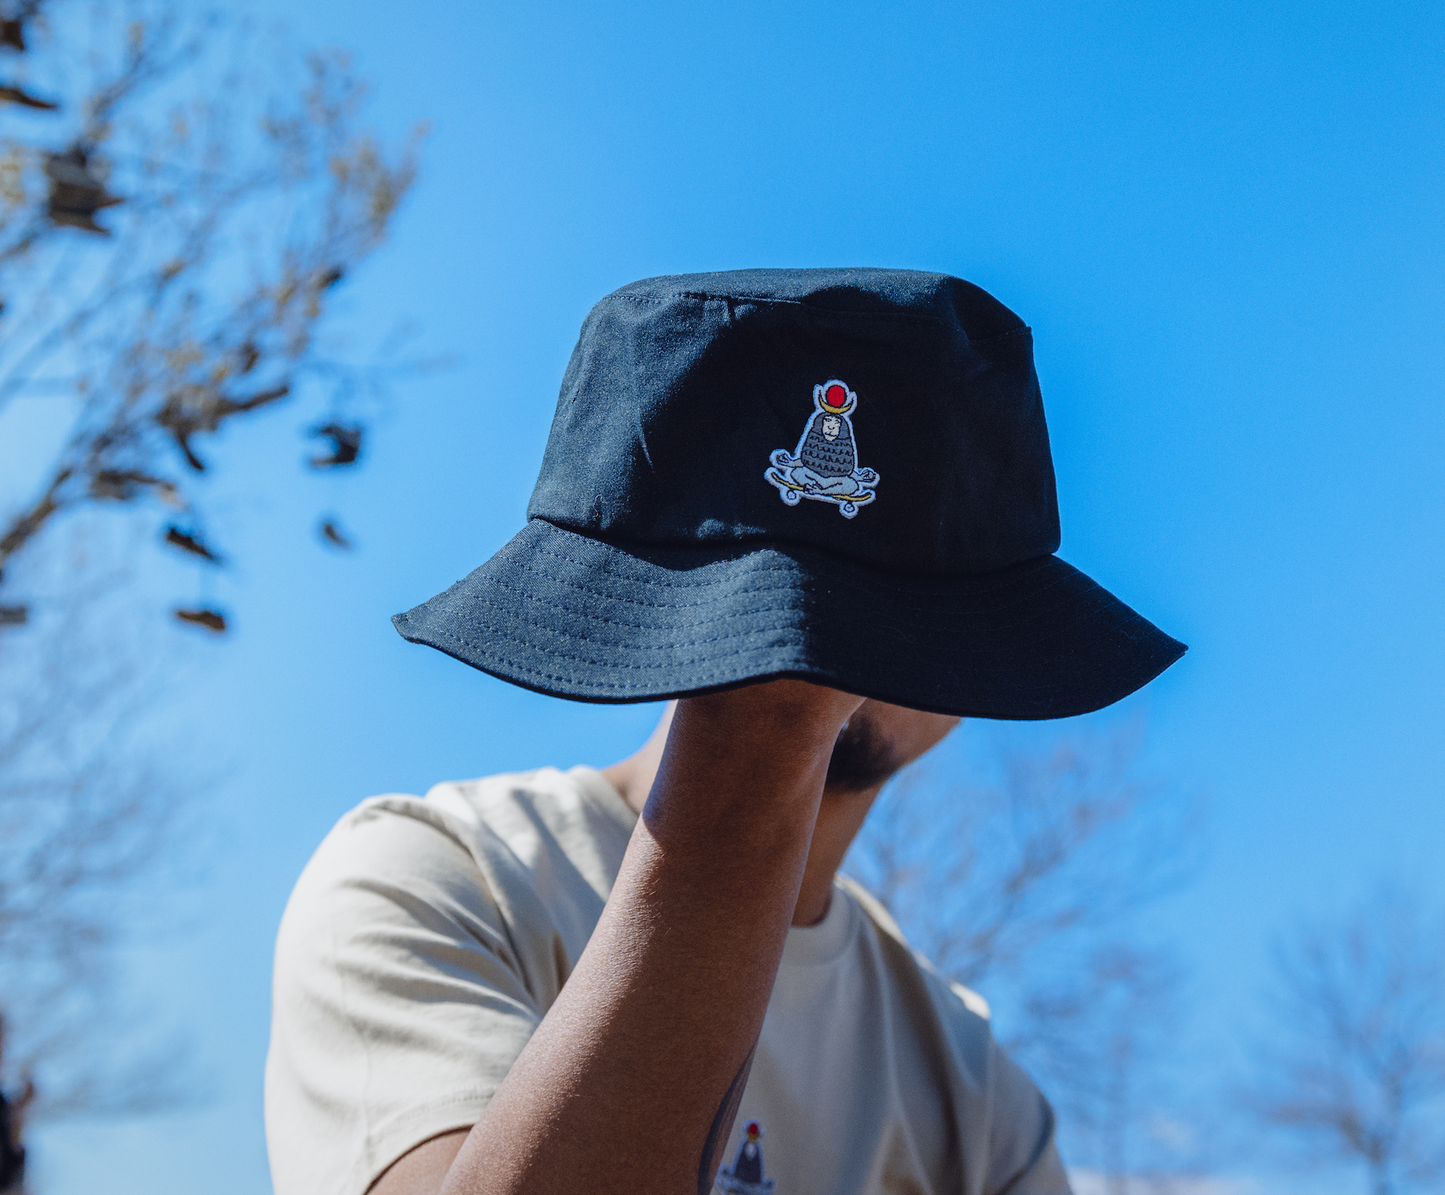 'Skate and meditate' bucket hat